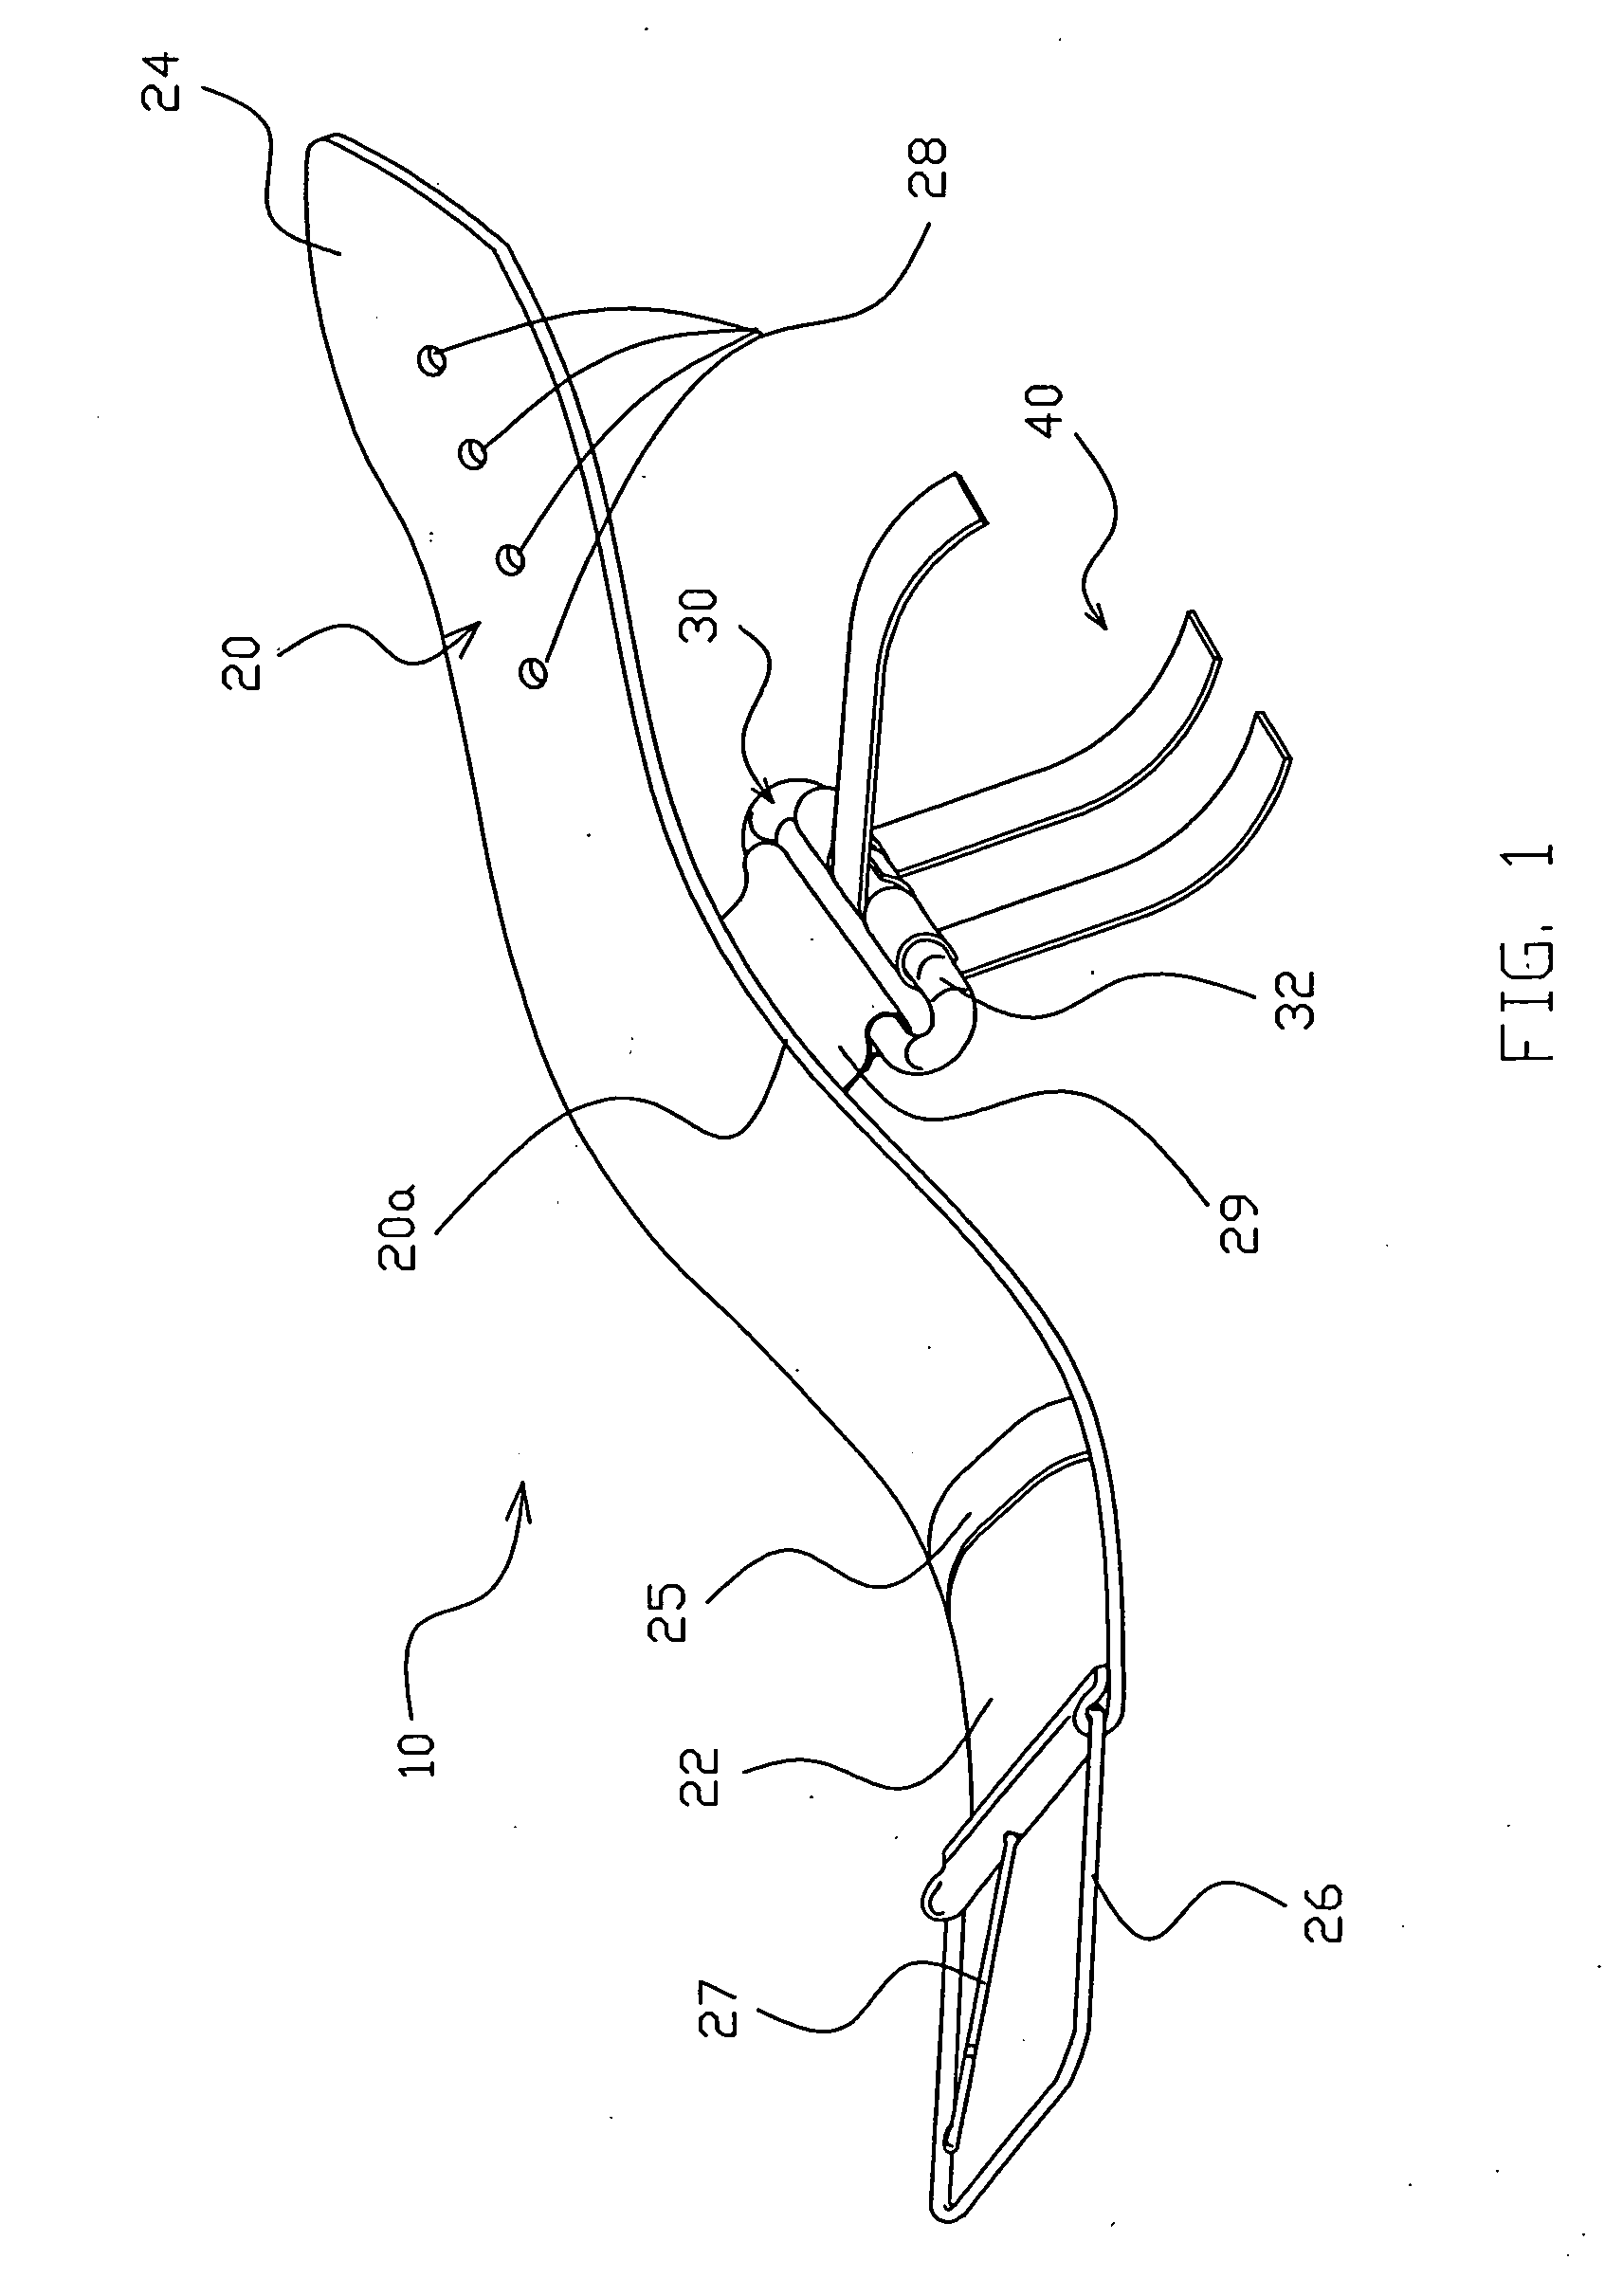 Weight-lifting device and method of use therefor